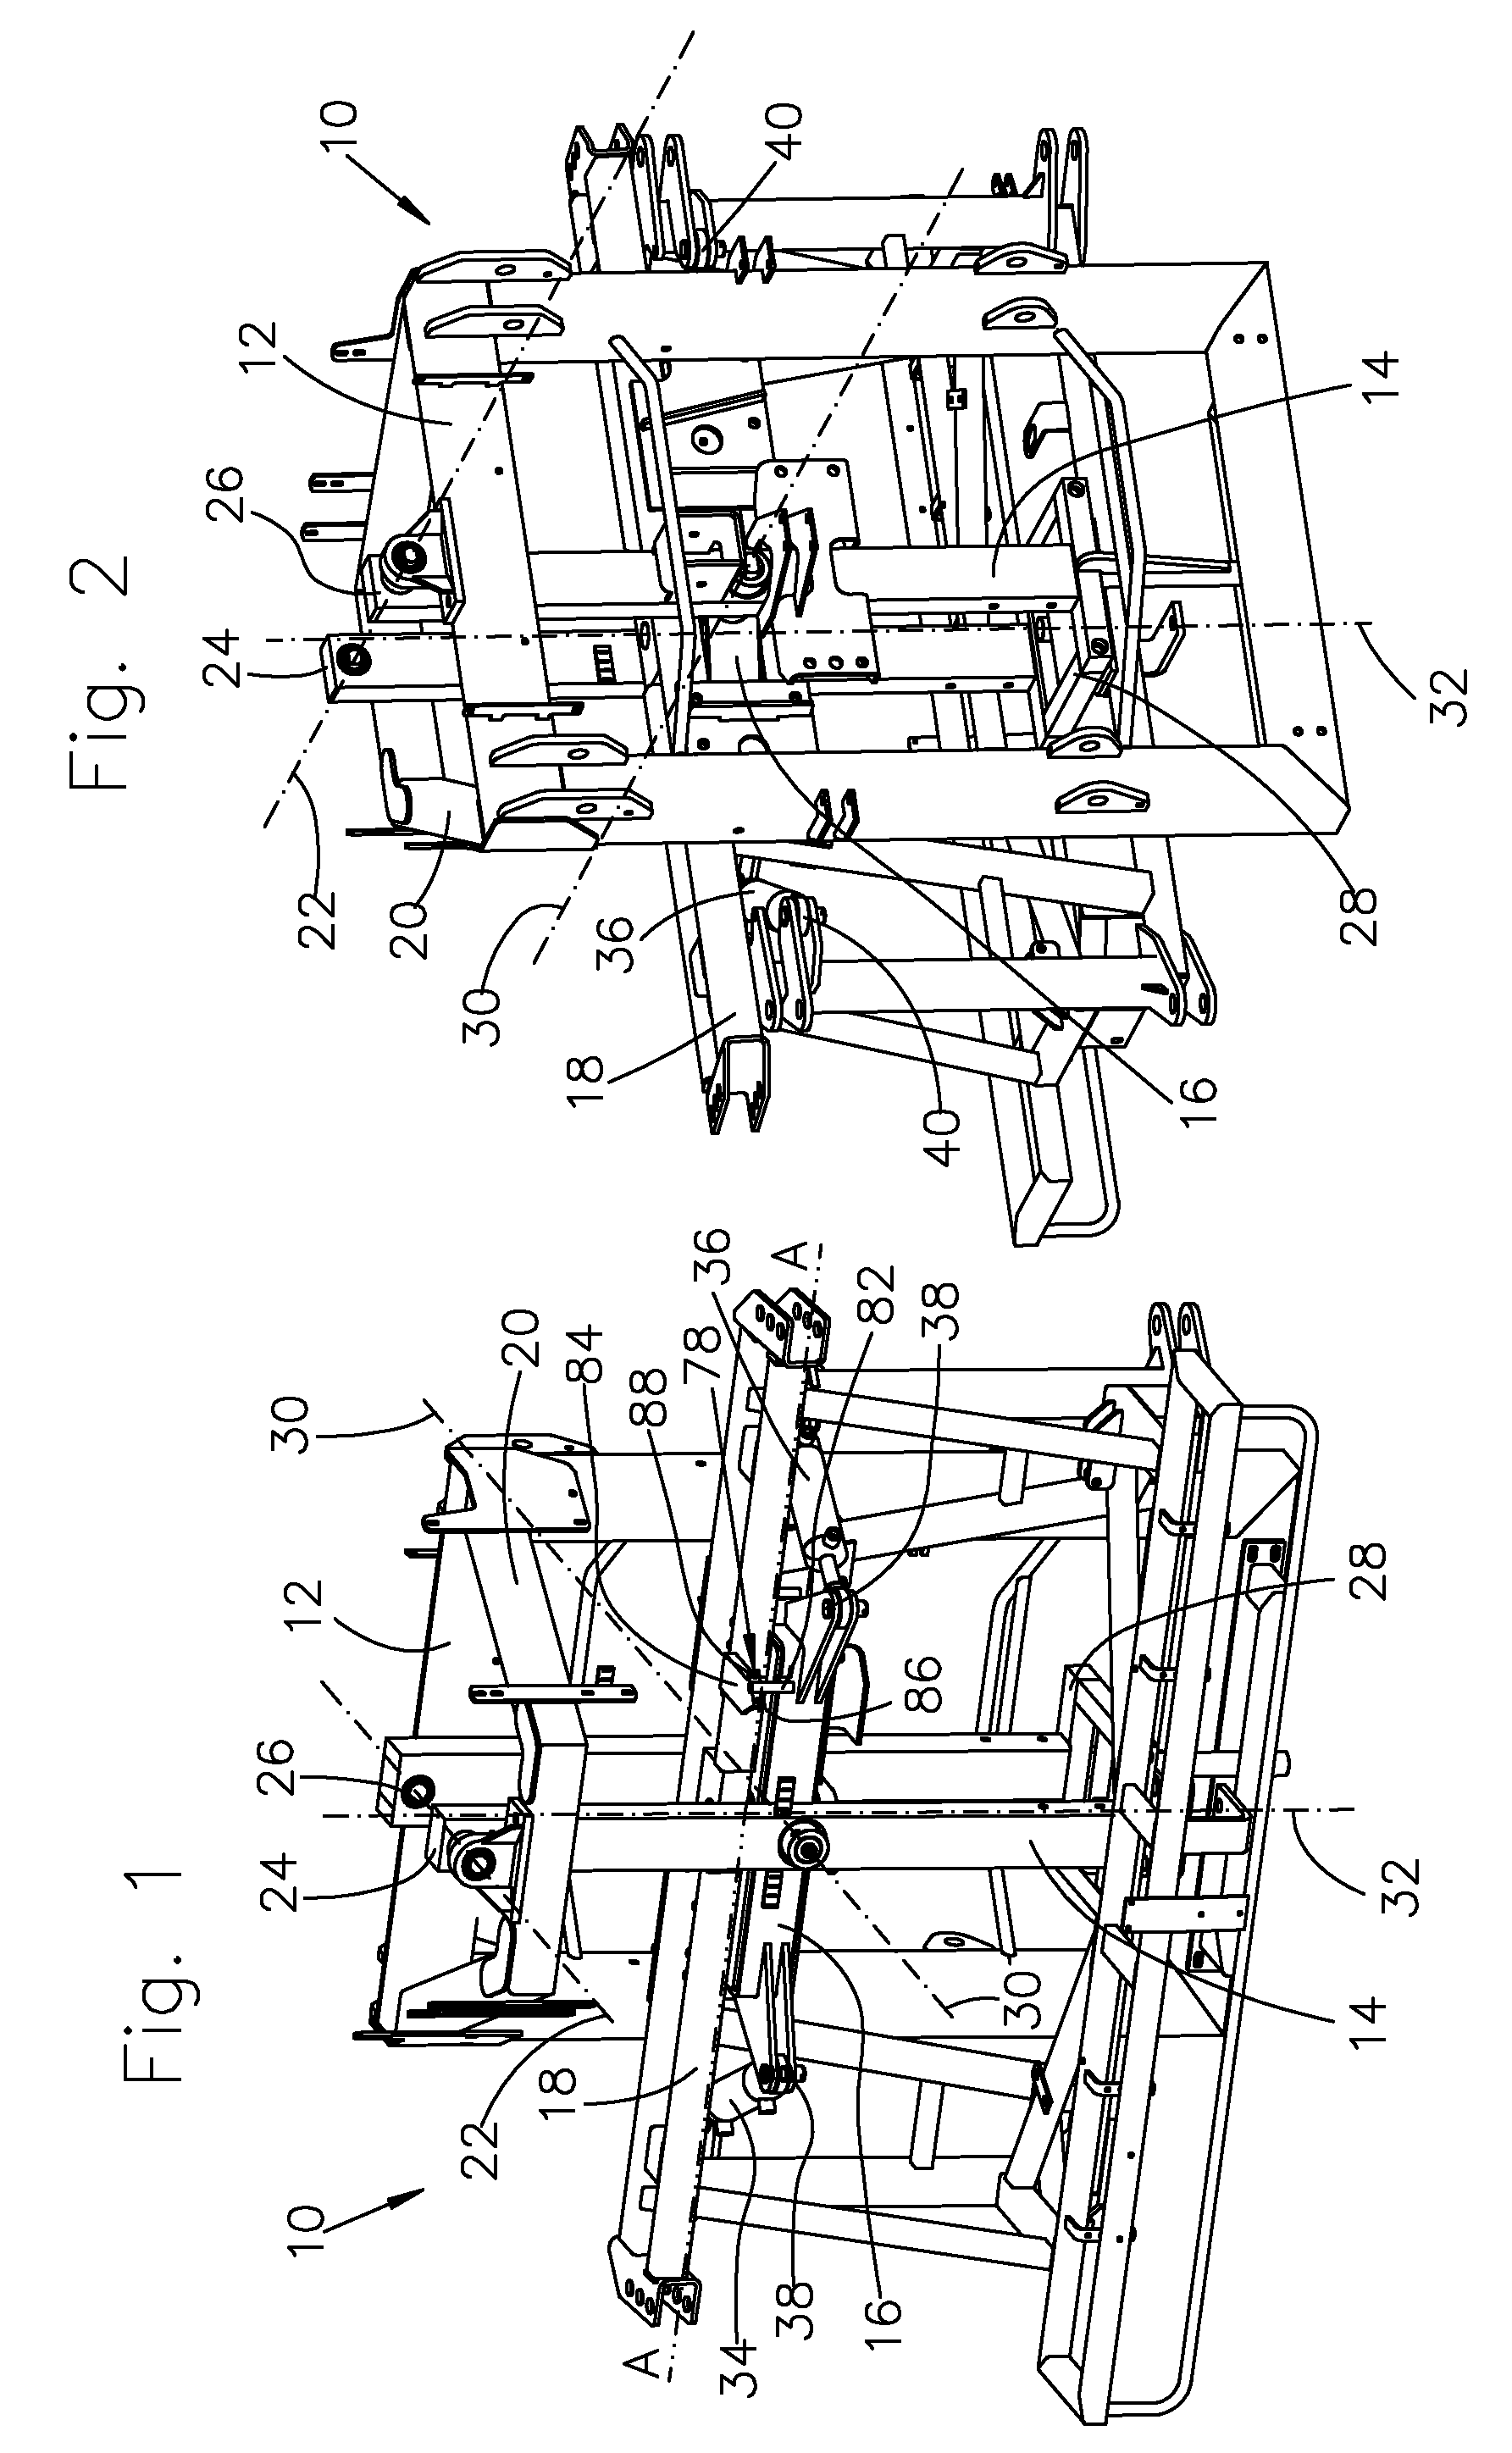 Spray boom with dampening device